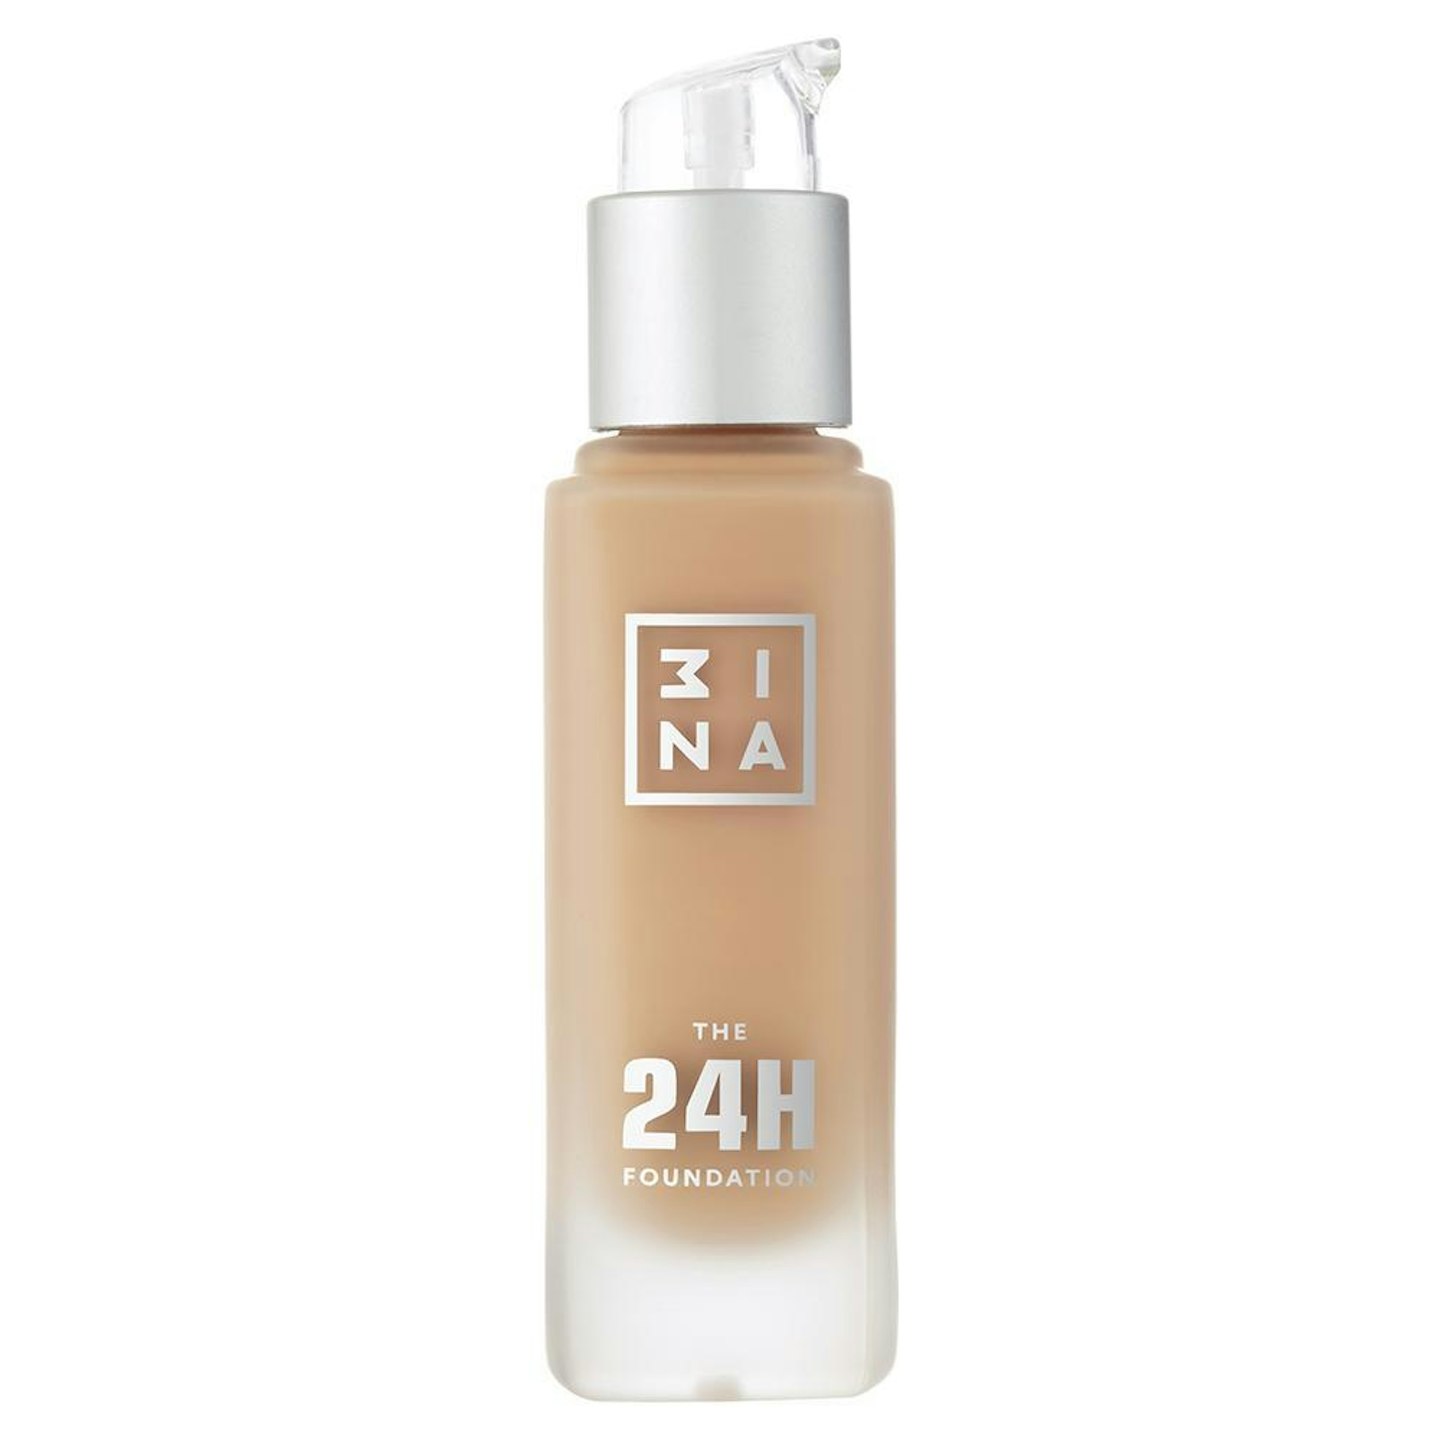 3ina The 24H Foundation, £24.95